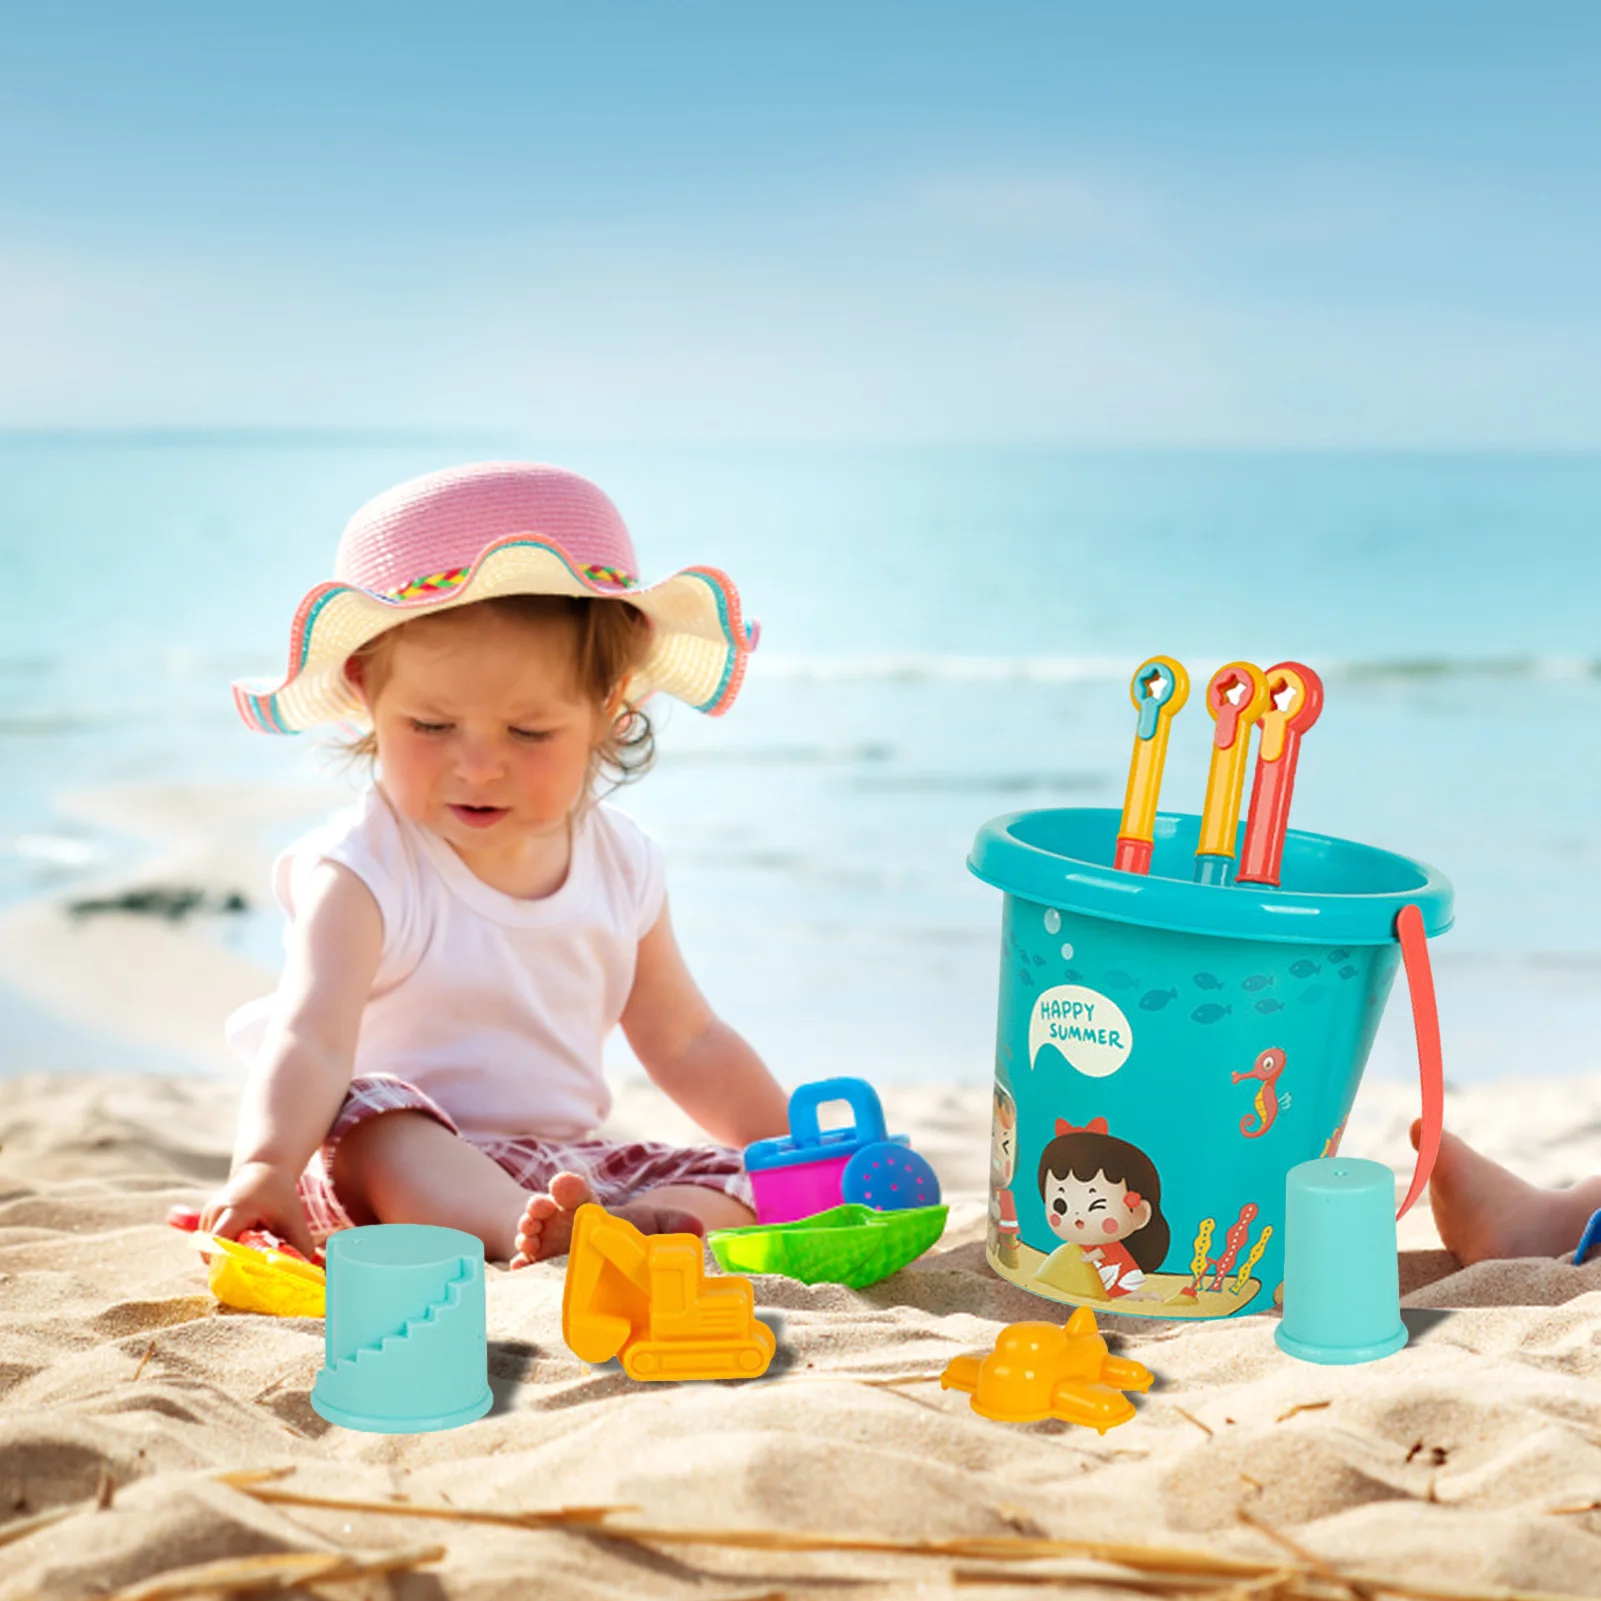 

14/18Pcs Summer Beach Toy Set Drop-resistant Thickened Design Play Sand Water Play Tools Including Sand Bucket Shovel Sand Truck